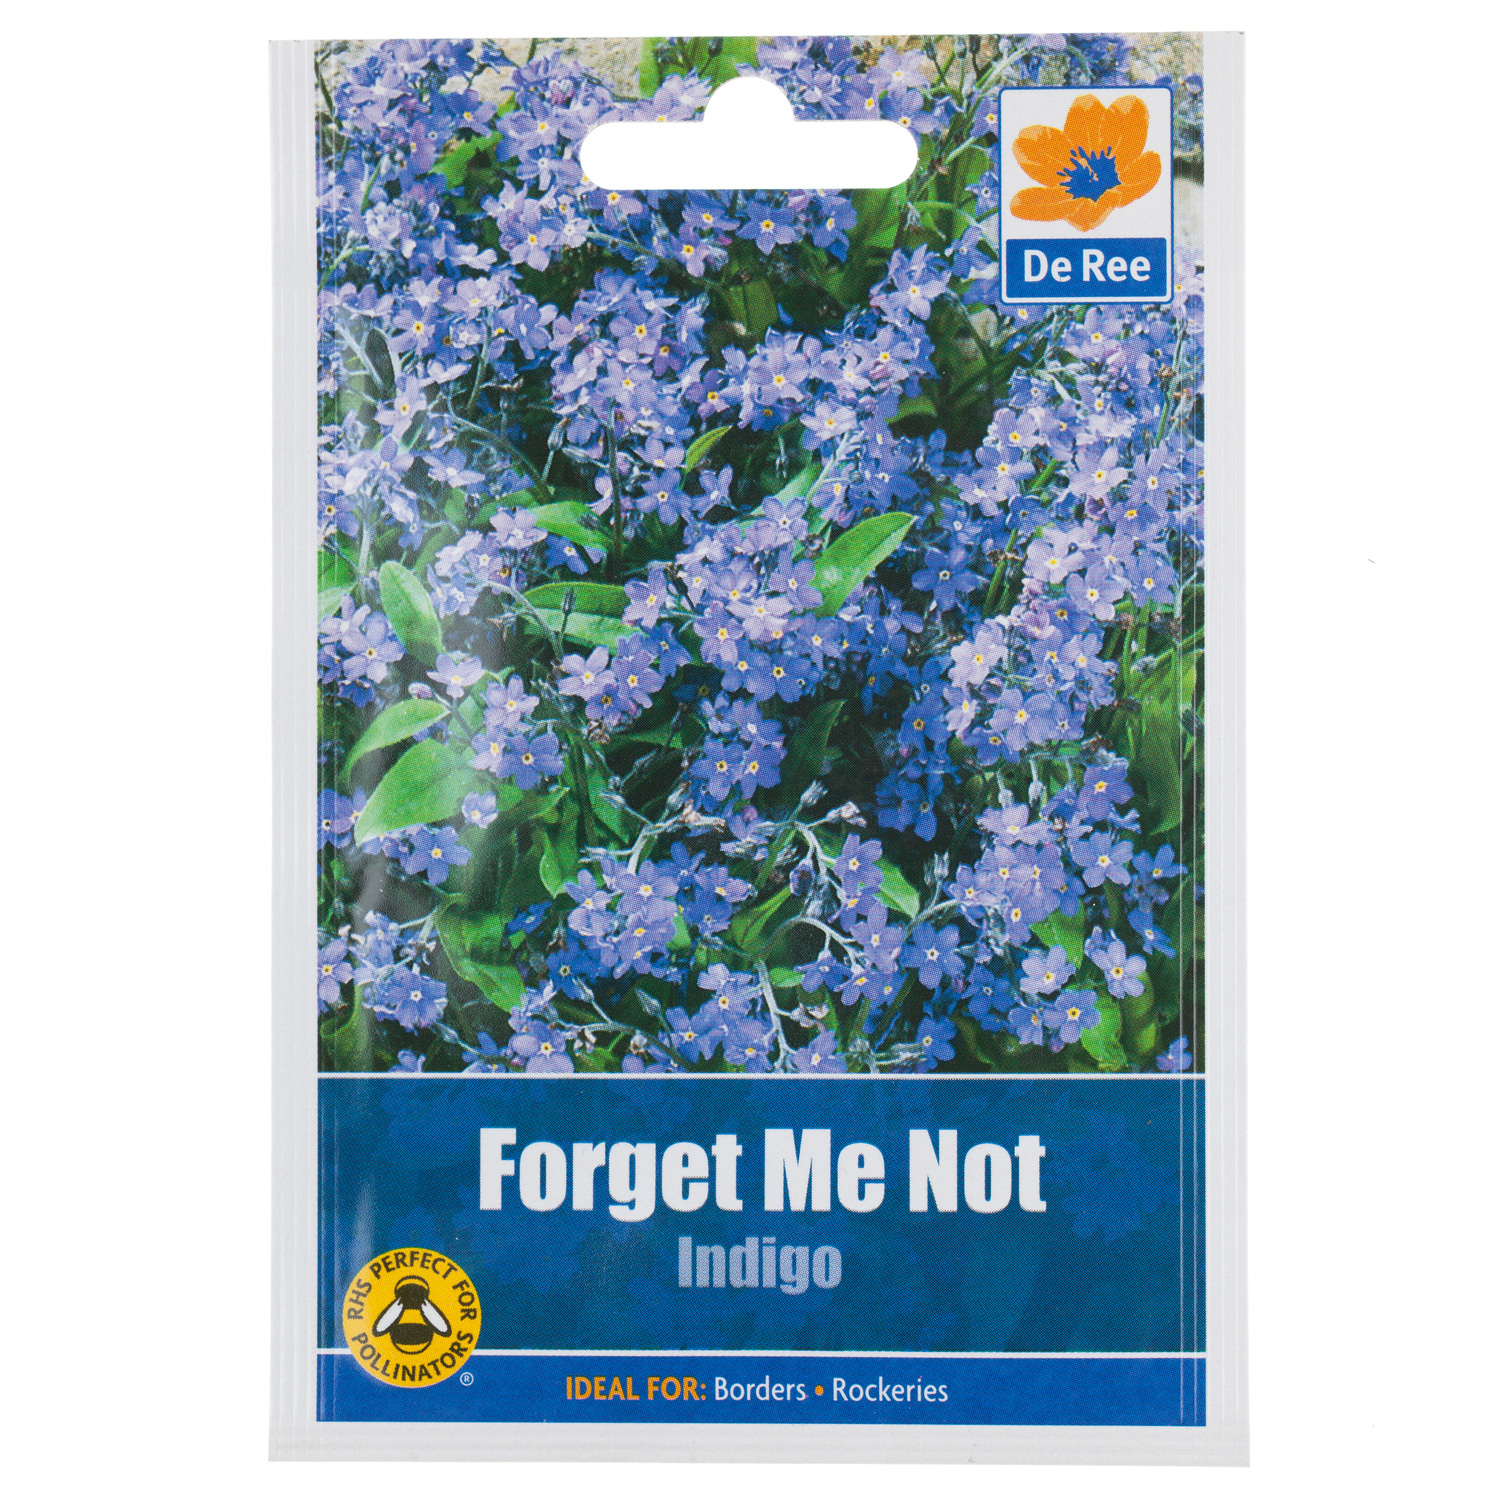 Forget Me Not Indigo Seed Packet Image 2